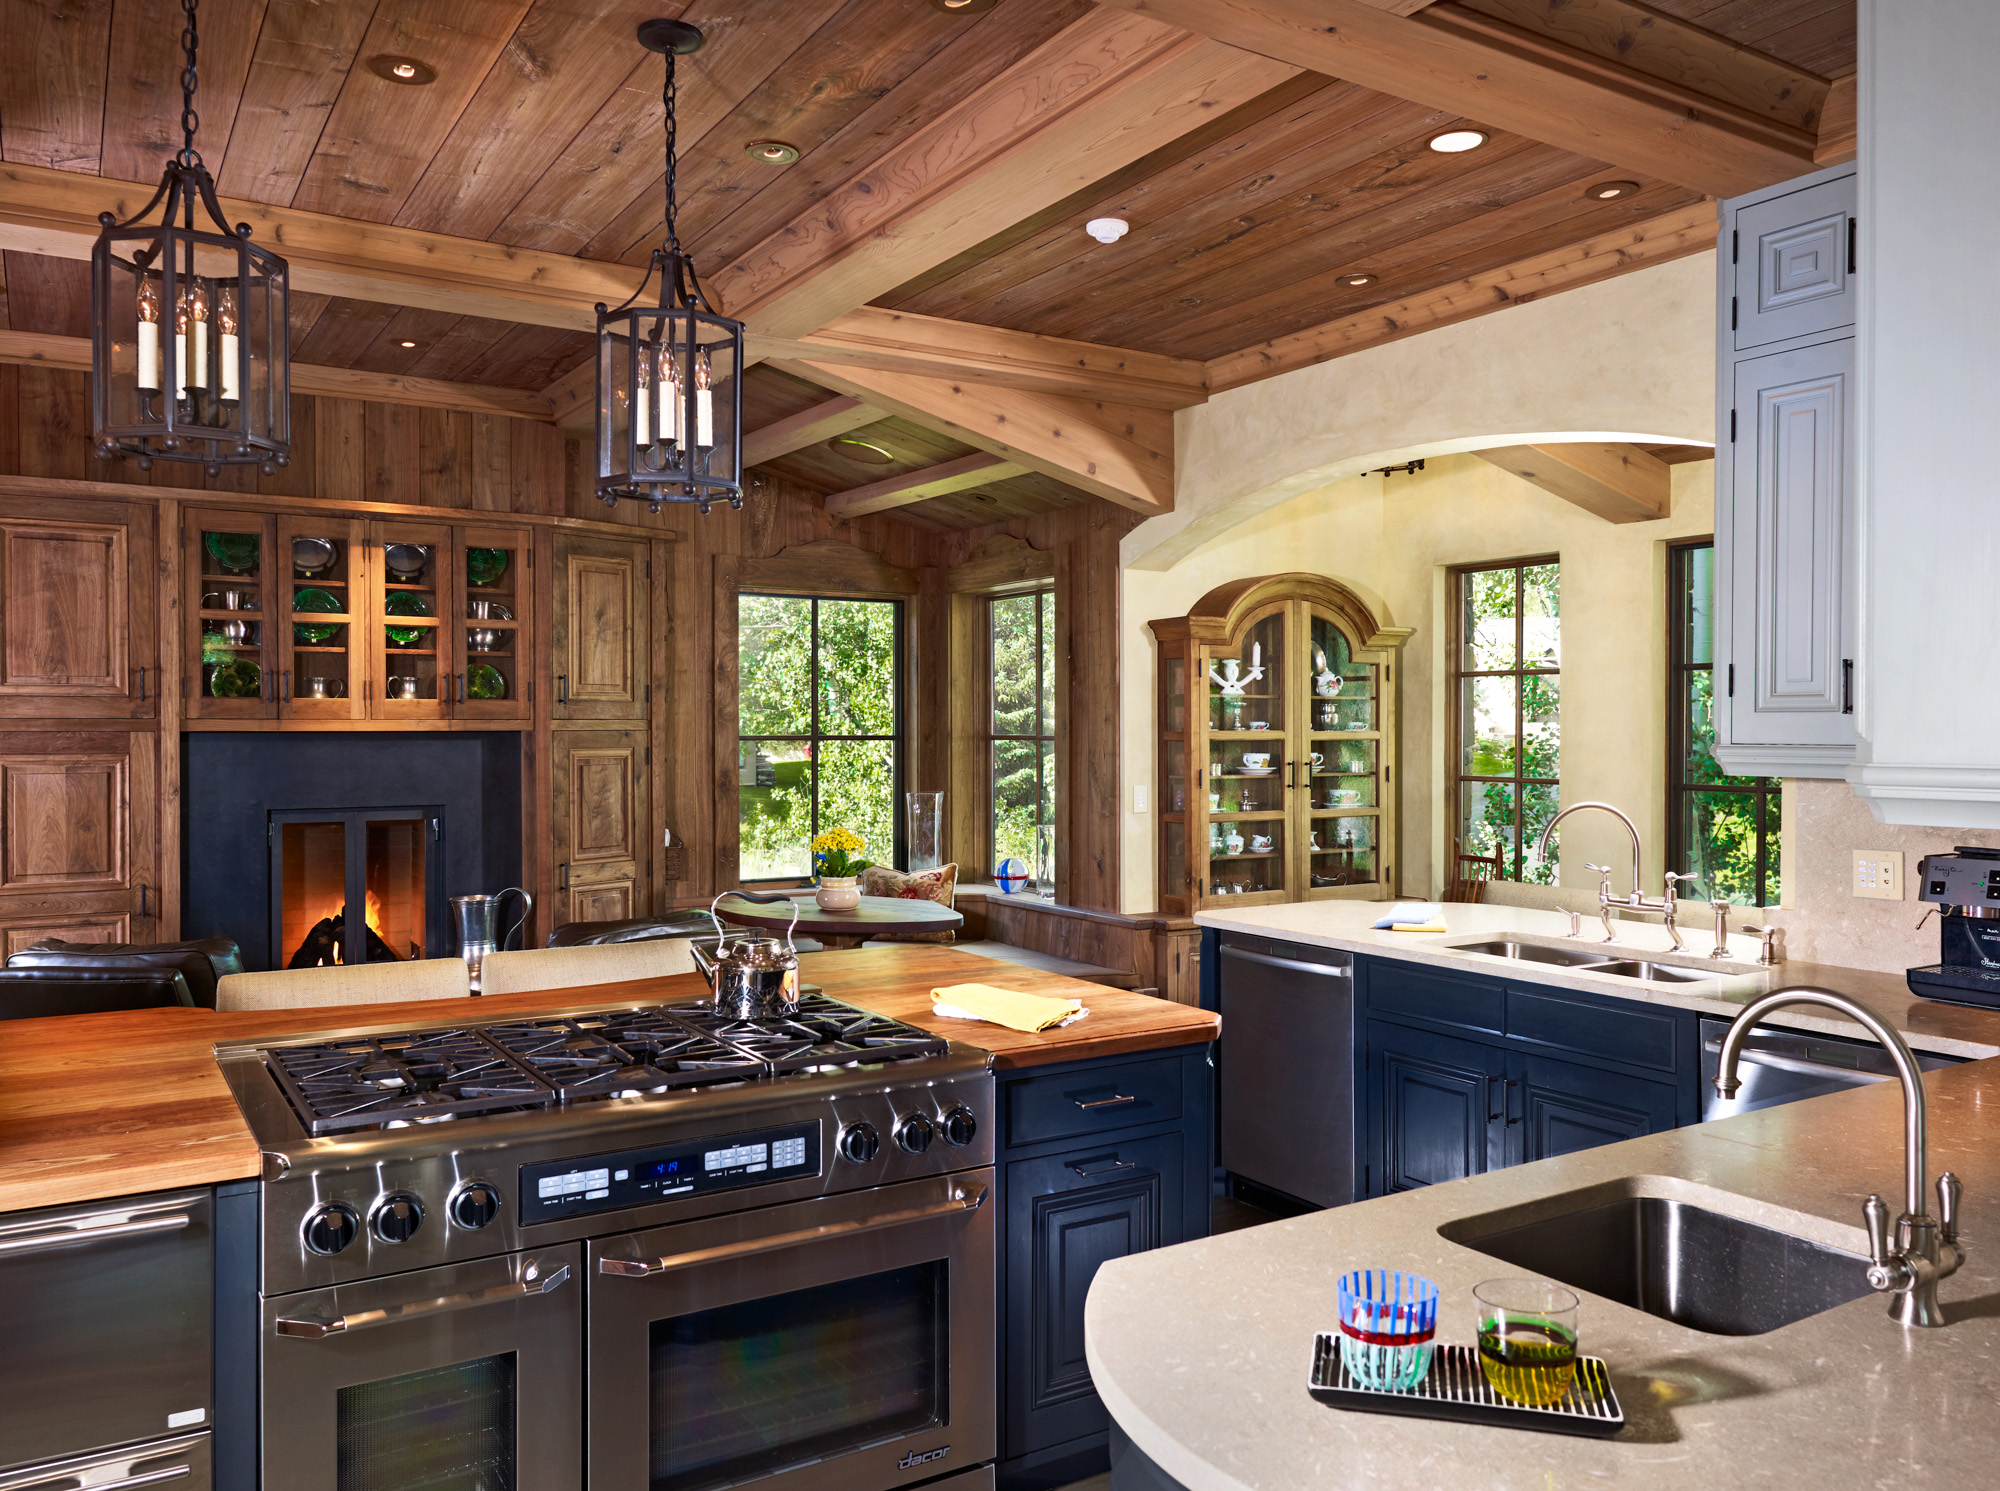 A rustic kitchen with blue lower cabinets and wooden rustic trim at hornsilver